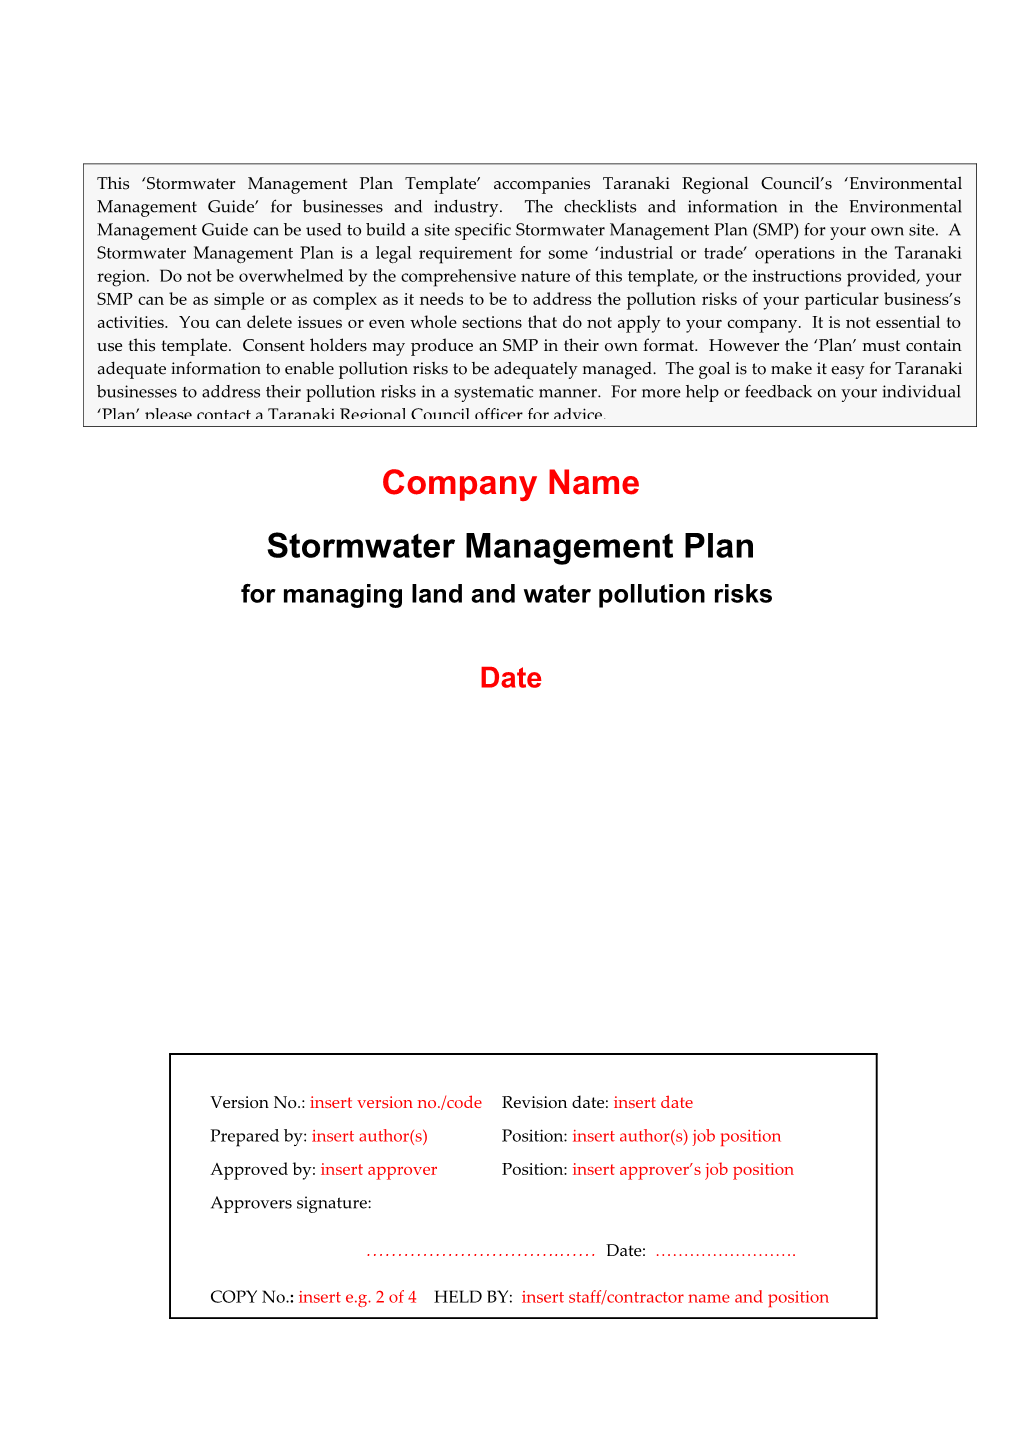 Guide to Management Plan